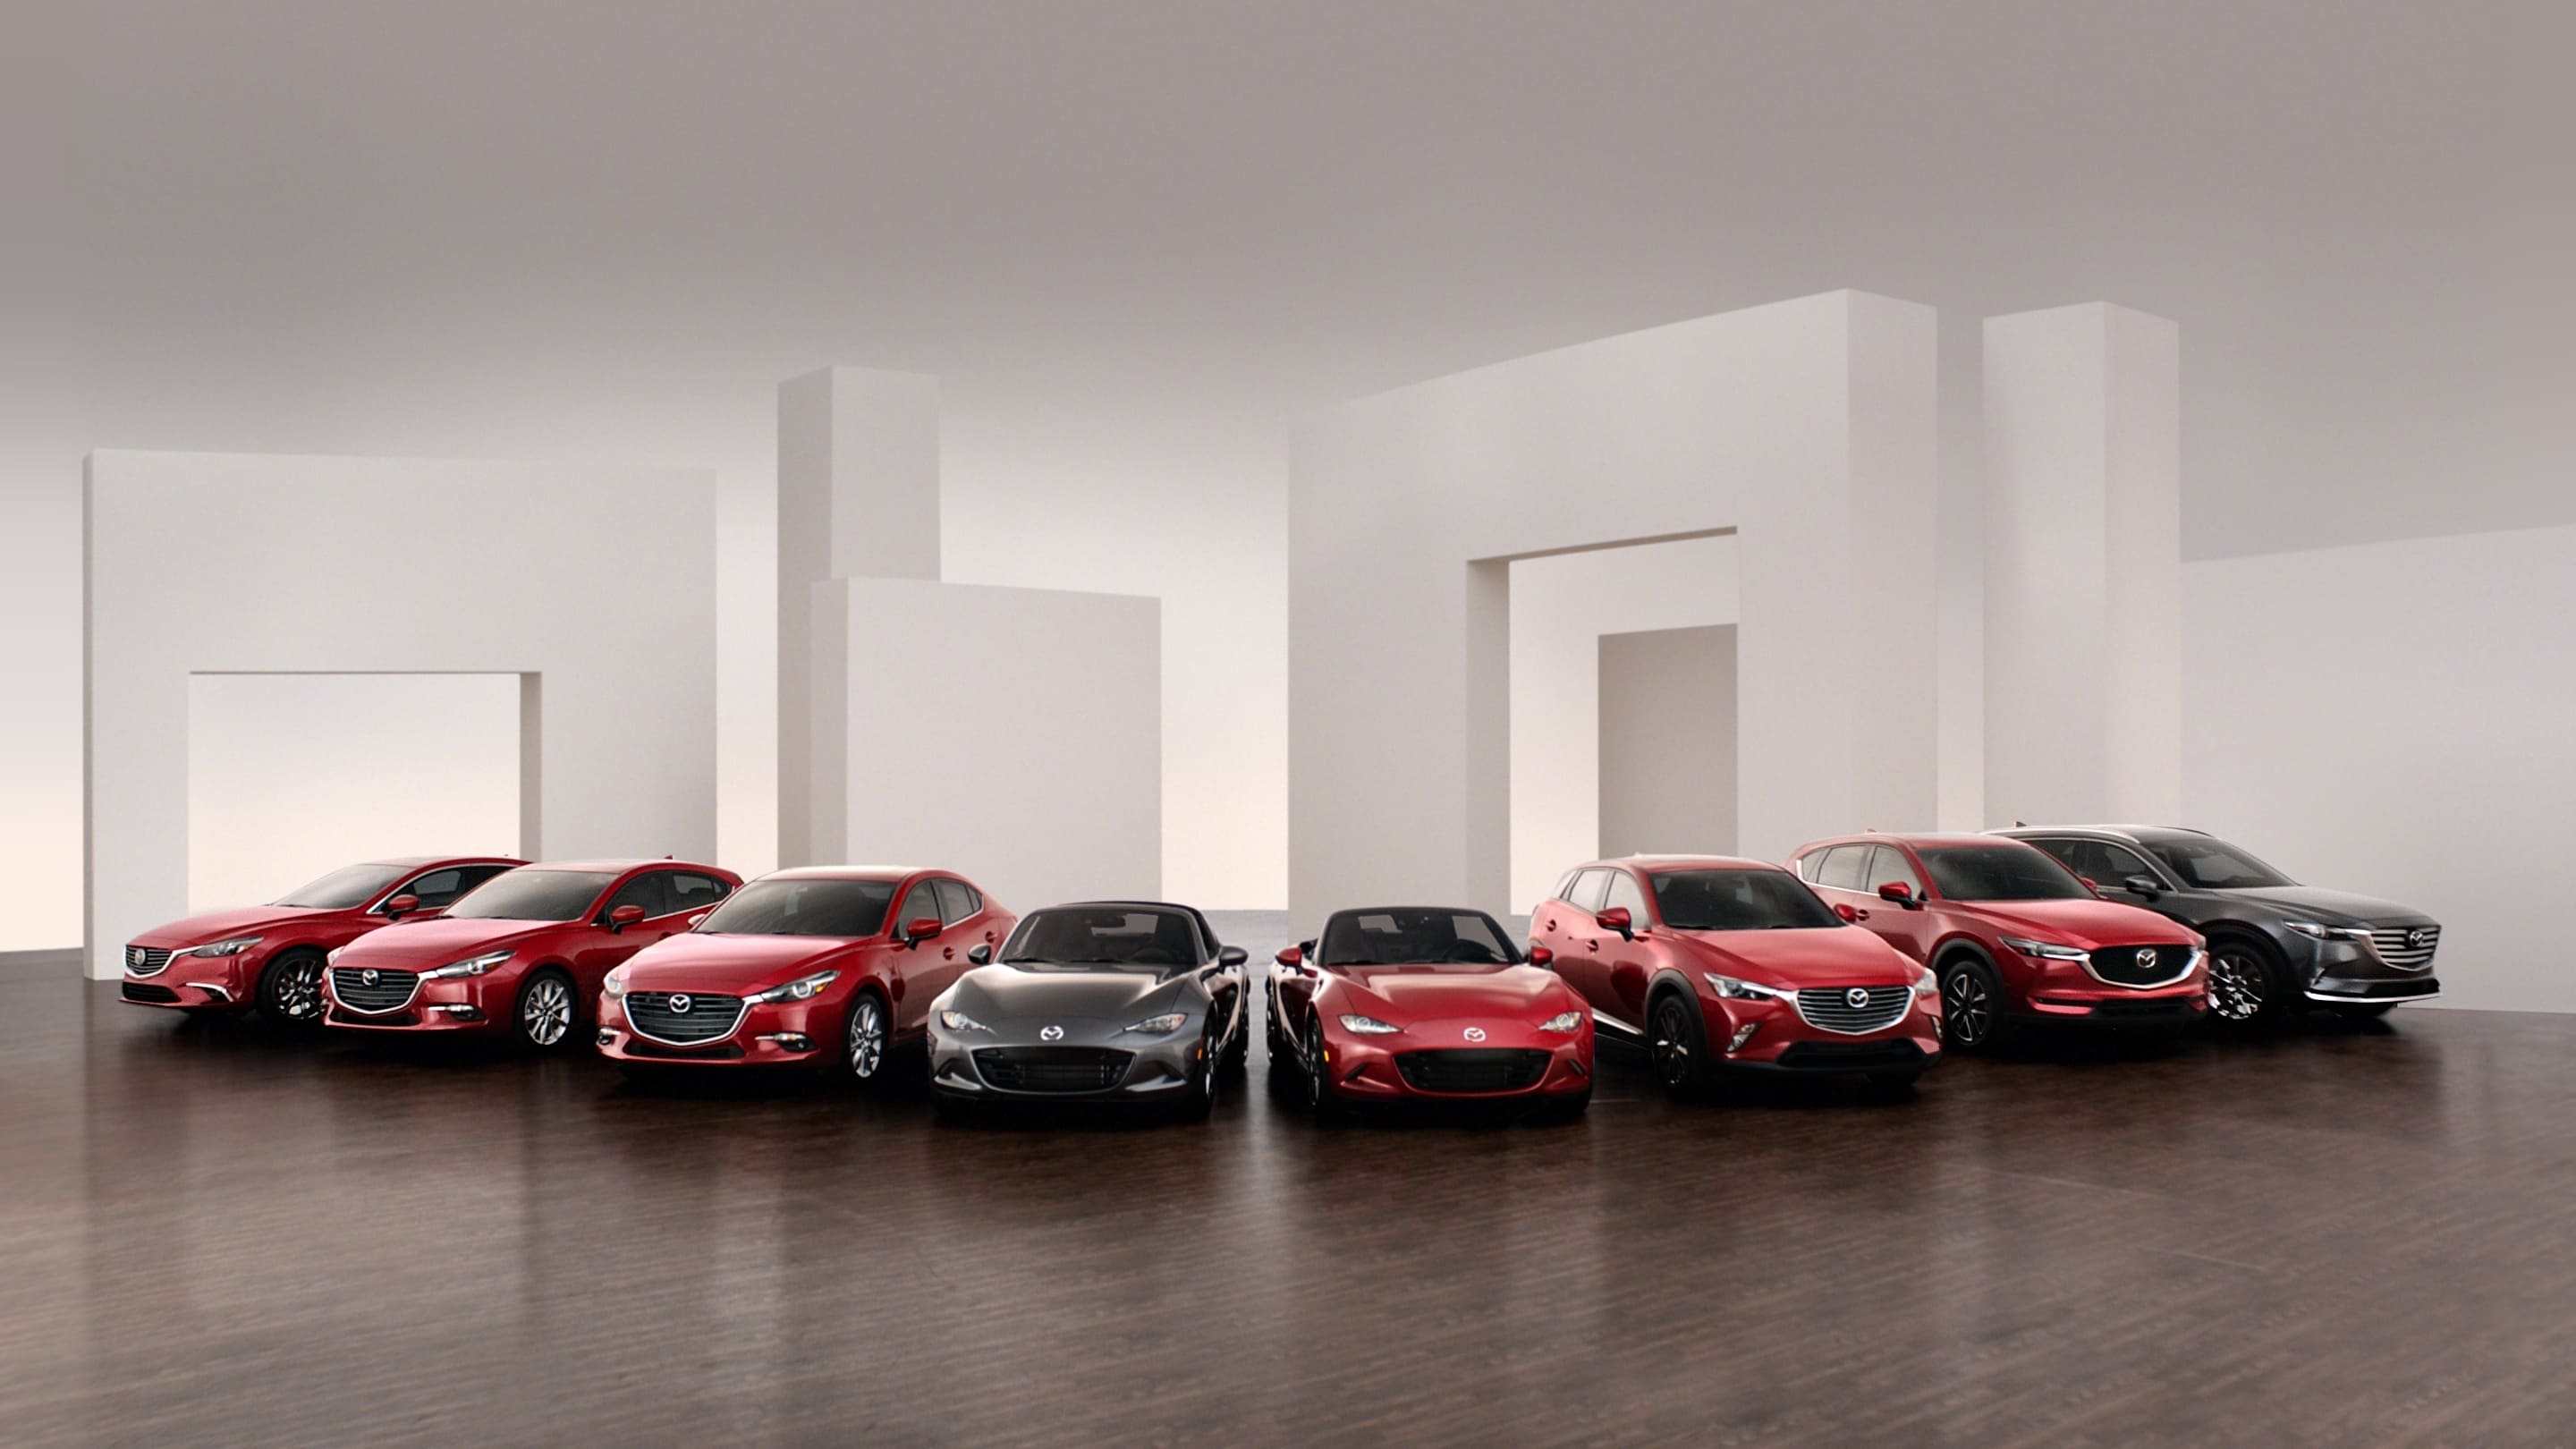  Introducing the 2023 Mazda SUV Lineup at Mazda of South Charlotte! With multiple models available for sale, you can be sure that you're getting the signature reliability and quality that Mazda is known for. Visit us today to learn more about the incredible features and benefits of the new lineup. From the power and capability of the Mazda RX7, 2021 Mazda CX-5, and 2022 Mazda CX 5 to the luxurious interior and exterior design of the 2023 Mazda CX-9, Mazda of South Charlotte has the perfect SUV for you.